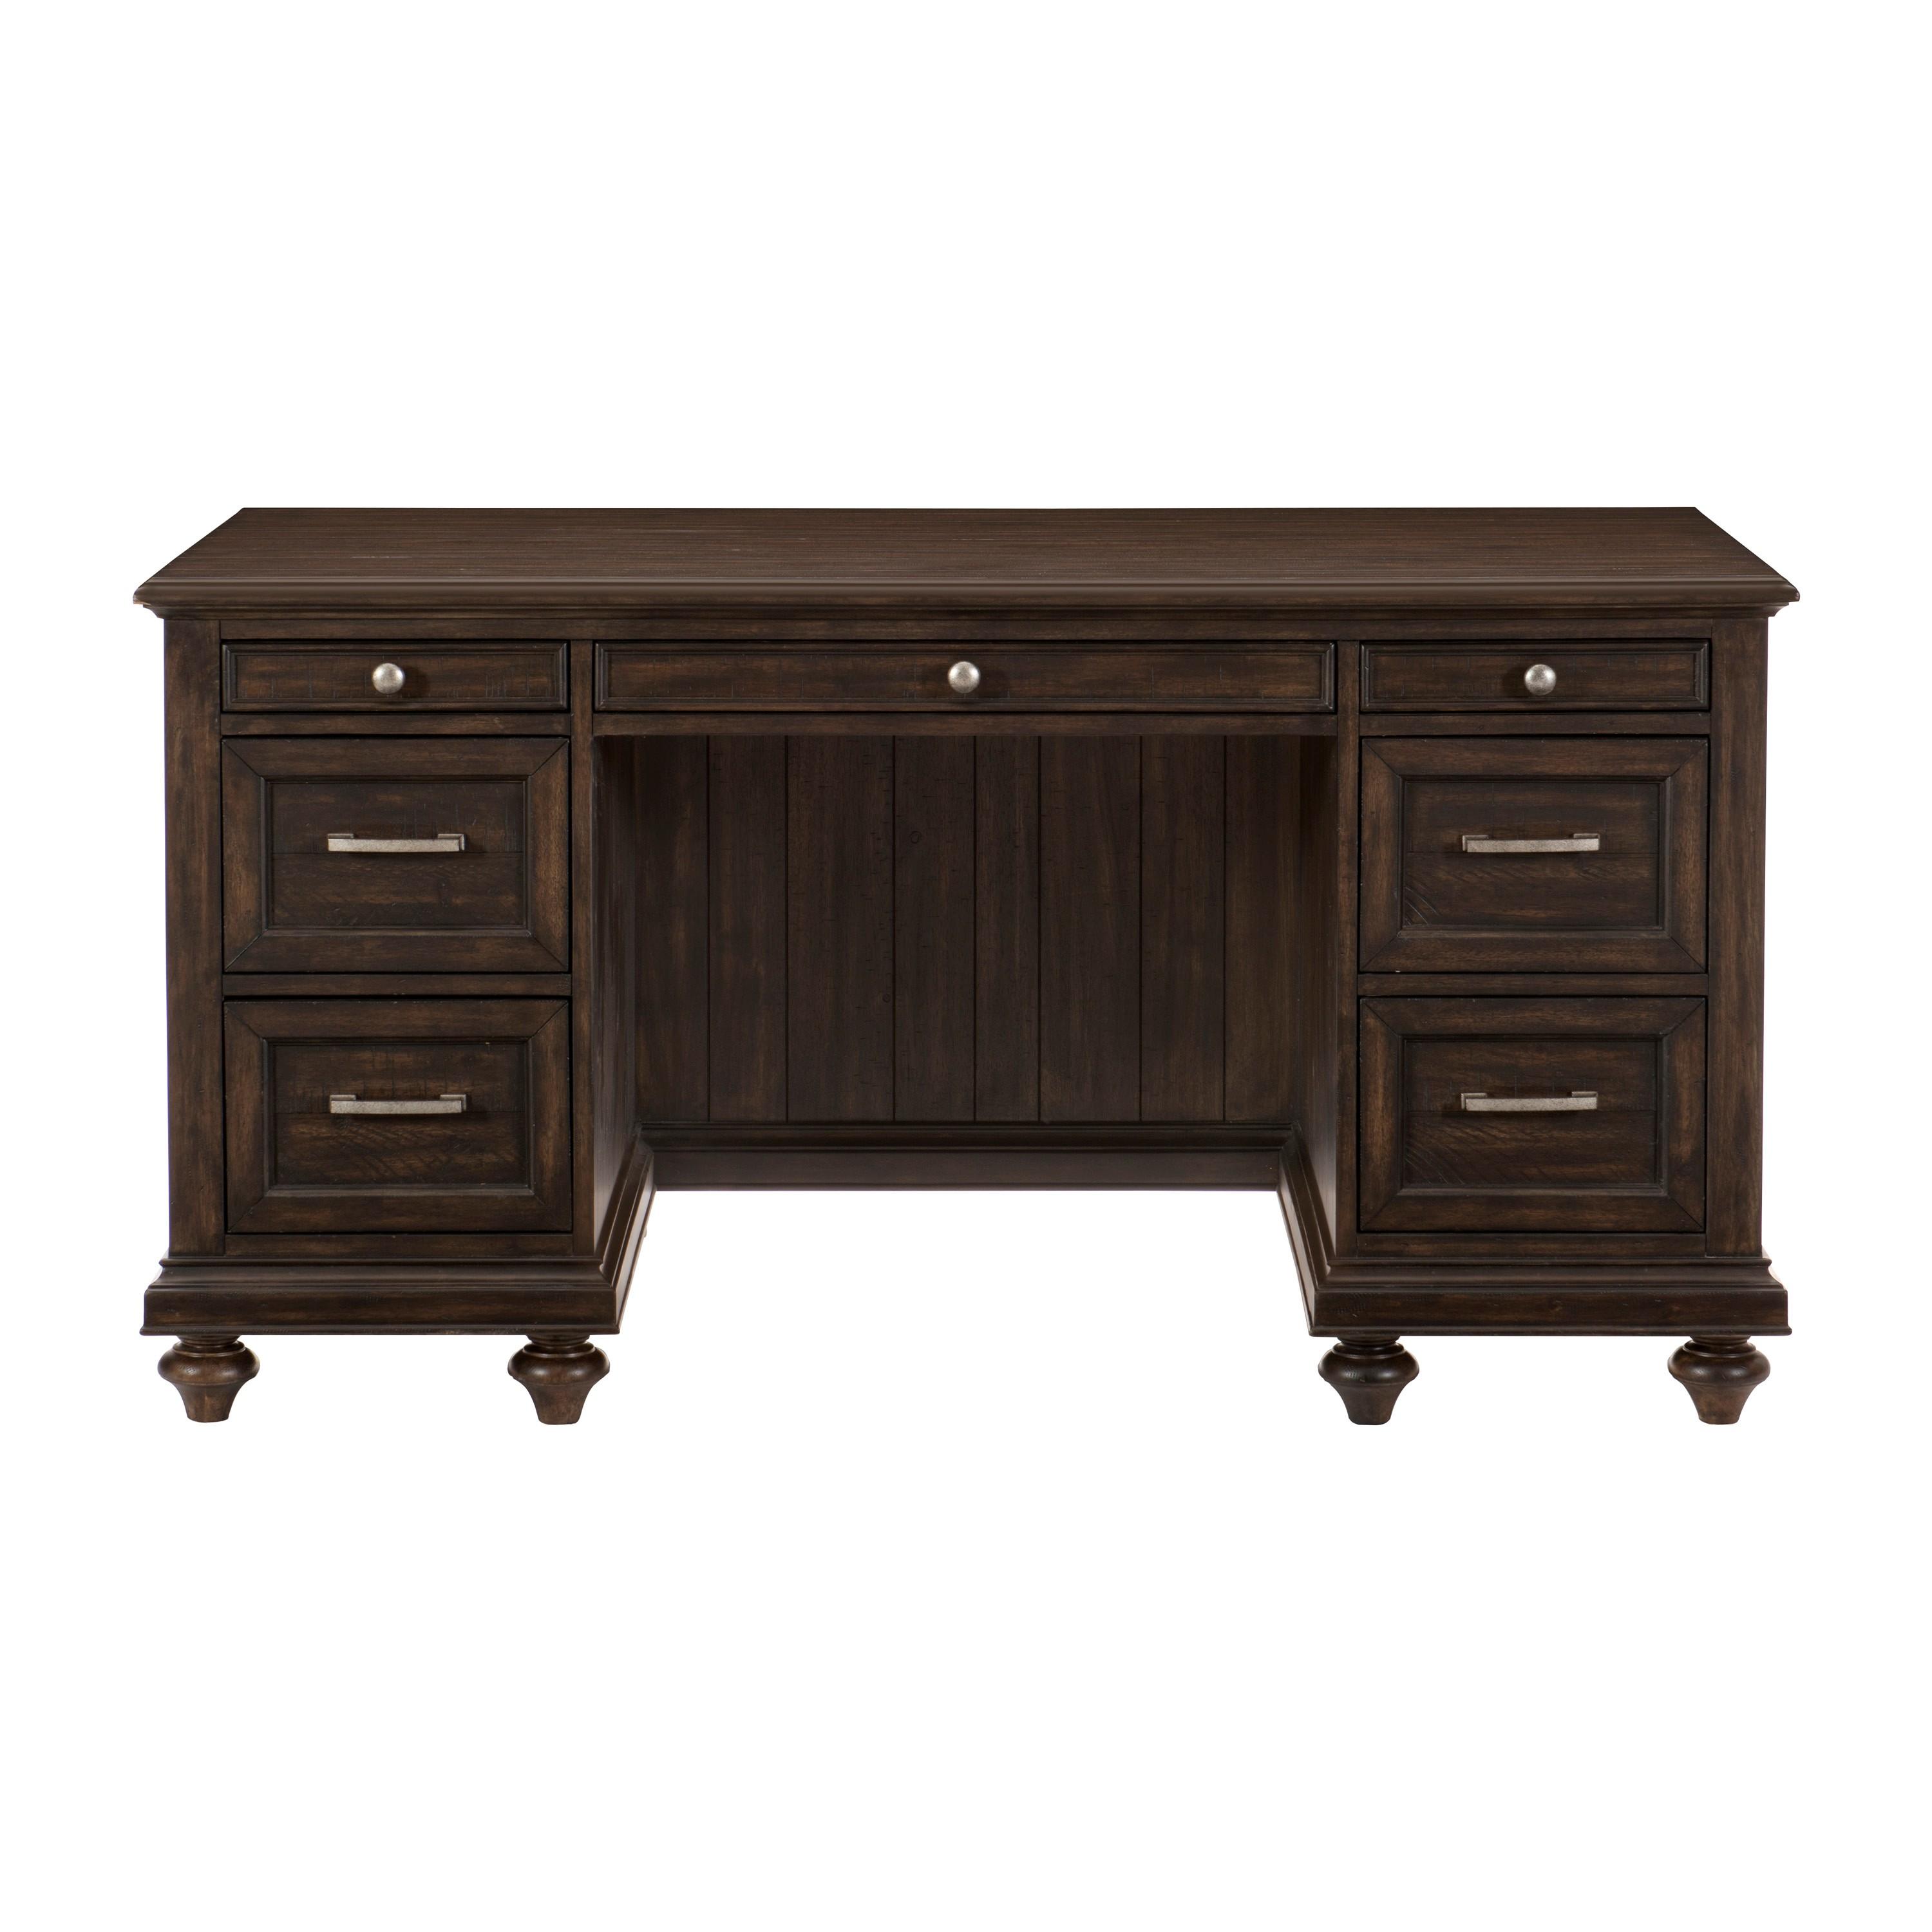 Transitional Executive Desk 1689-17 Cardano 1689-17 in Charcoal 